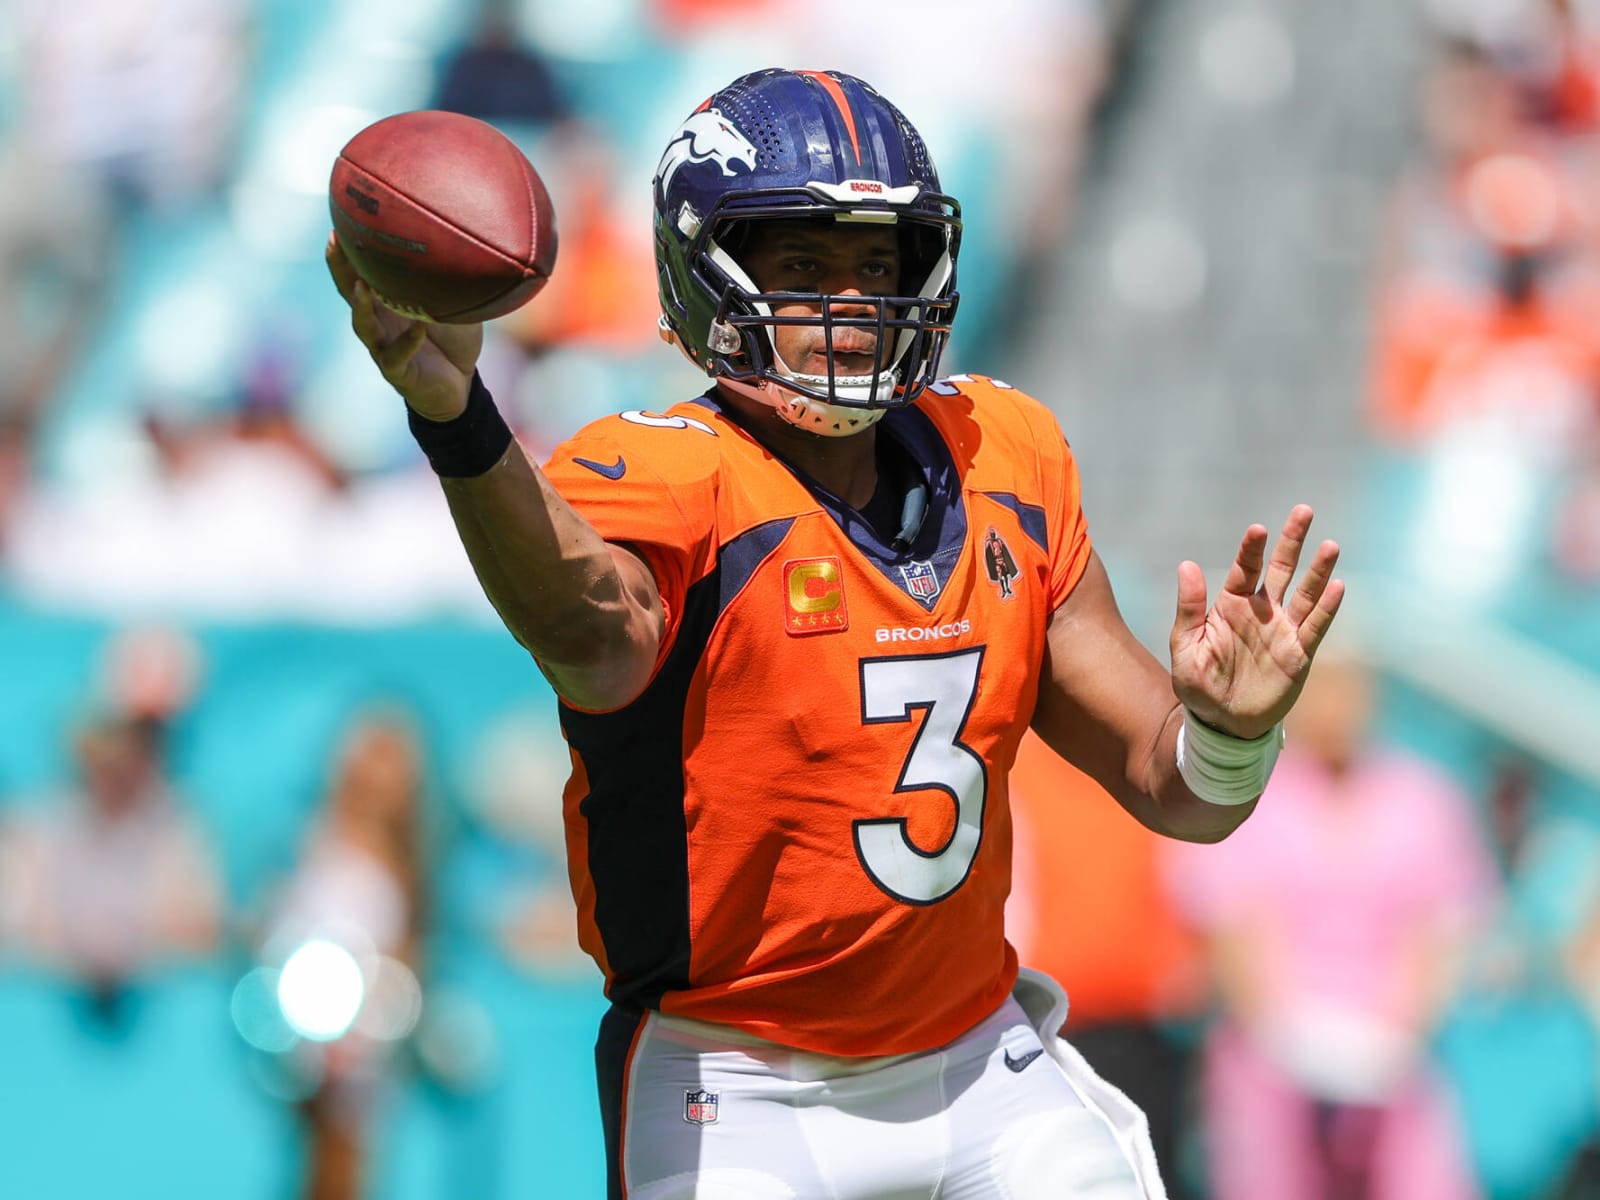 Twitter reacts to Broncos' embarrassing 70-20 loss to Dolphins